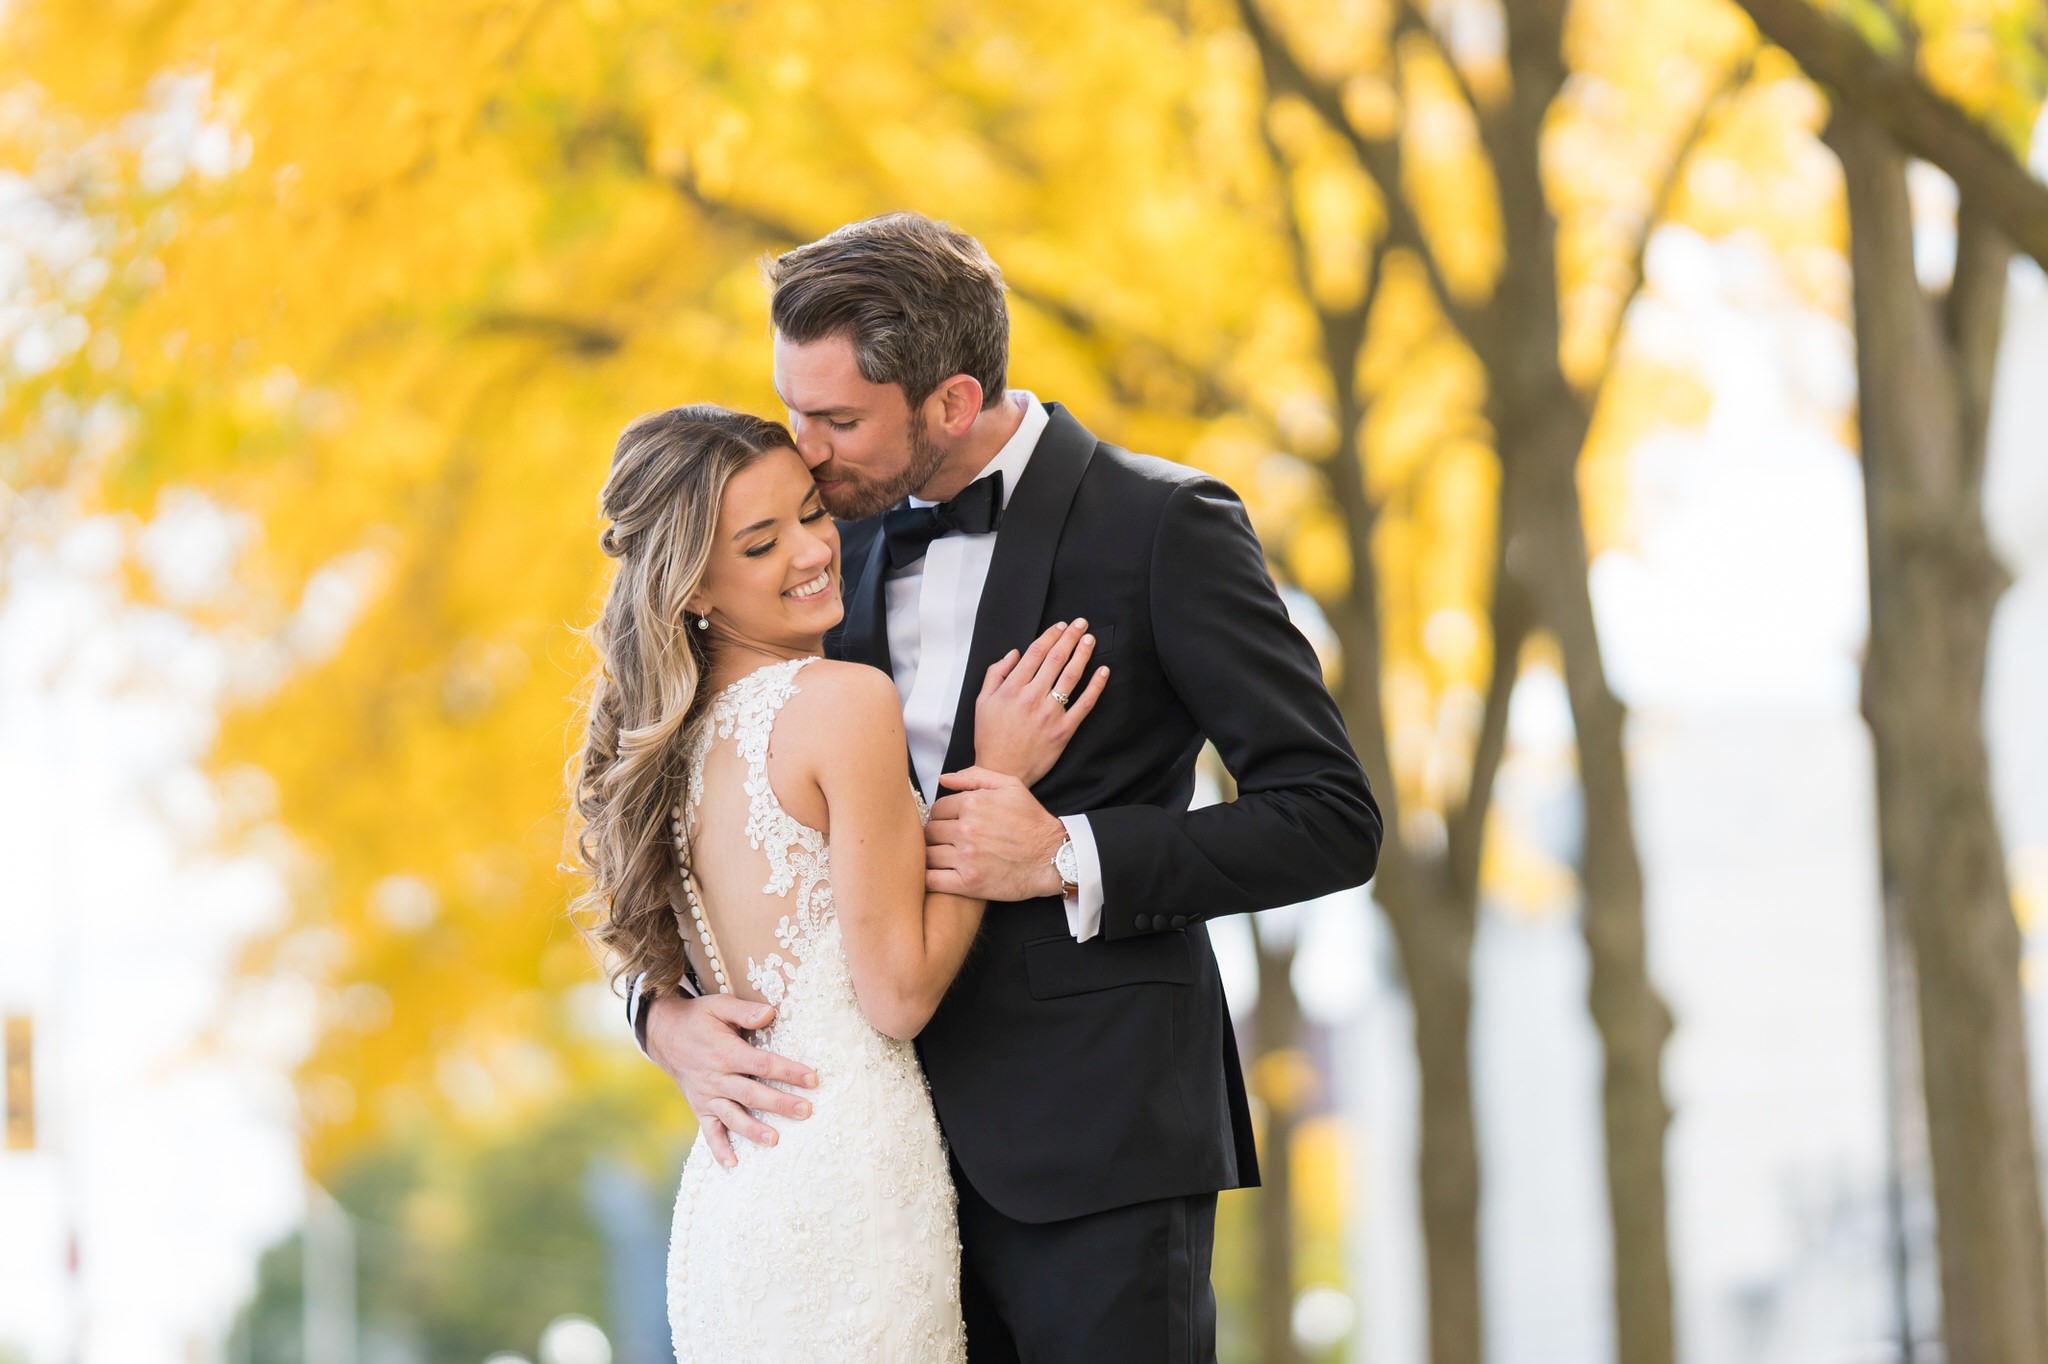 With her hand on his chest, a bride and groom pose with yellow trees in the background at the Detroit Institute of Art.